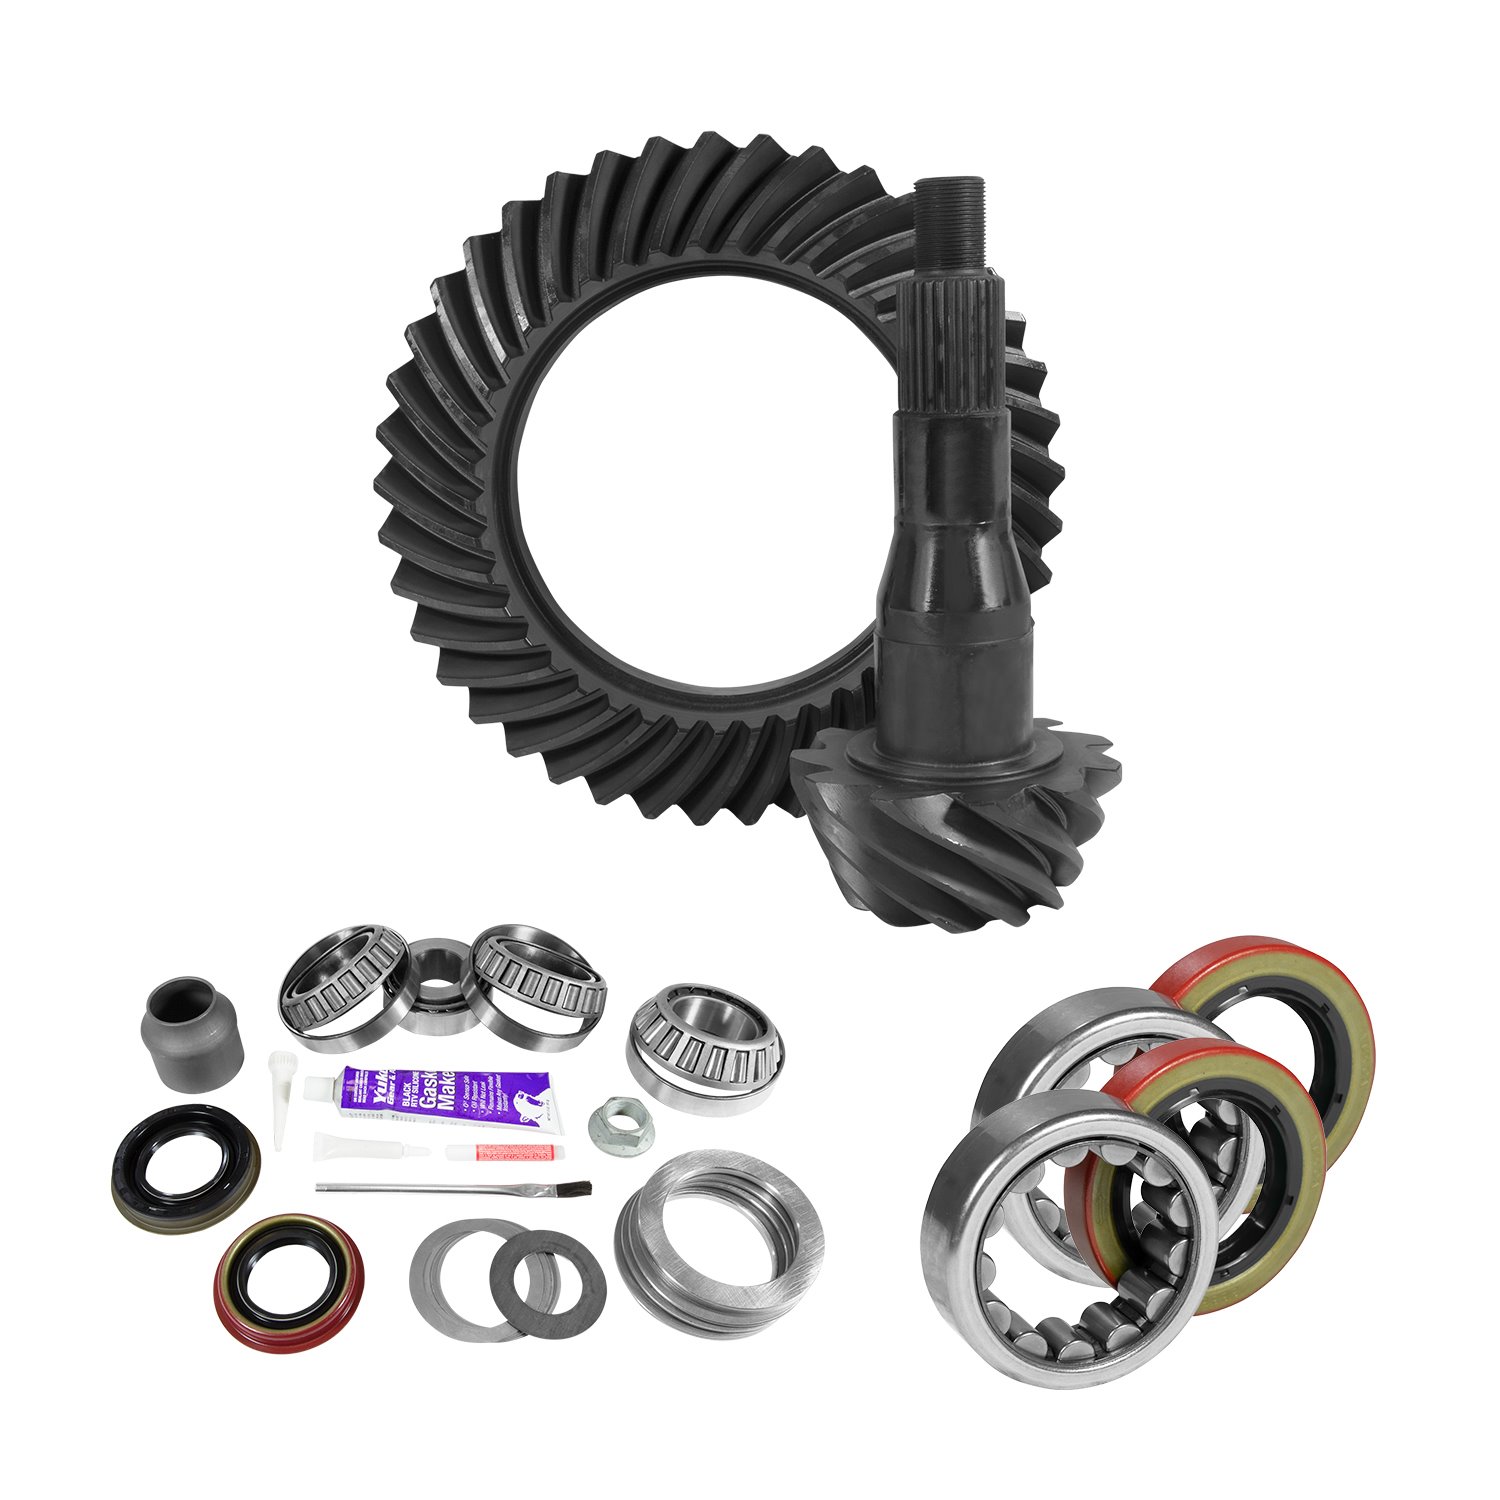 USA Standard 10799 9.75 in. Ford 3.55 Rear Ring & Pinion Install Kit, 2.53 in. Od Axle Bearings & Seal